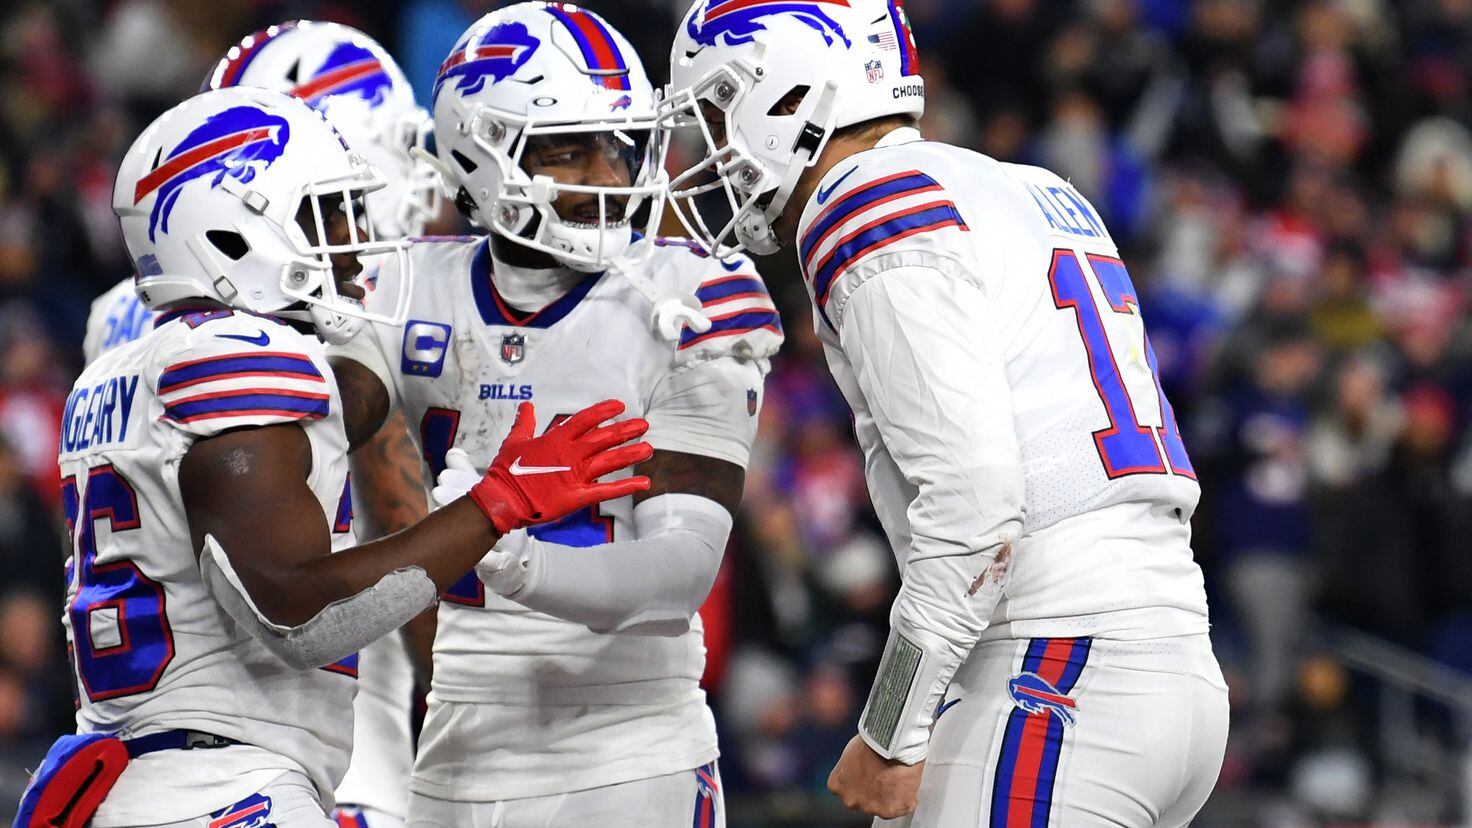 Bills game against the Patriots carries massive playoff implications